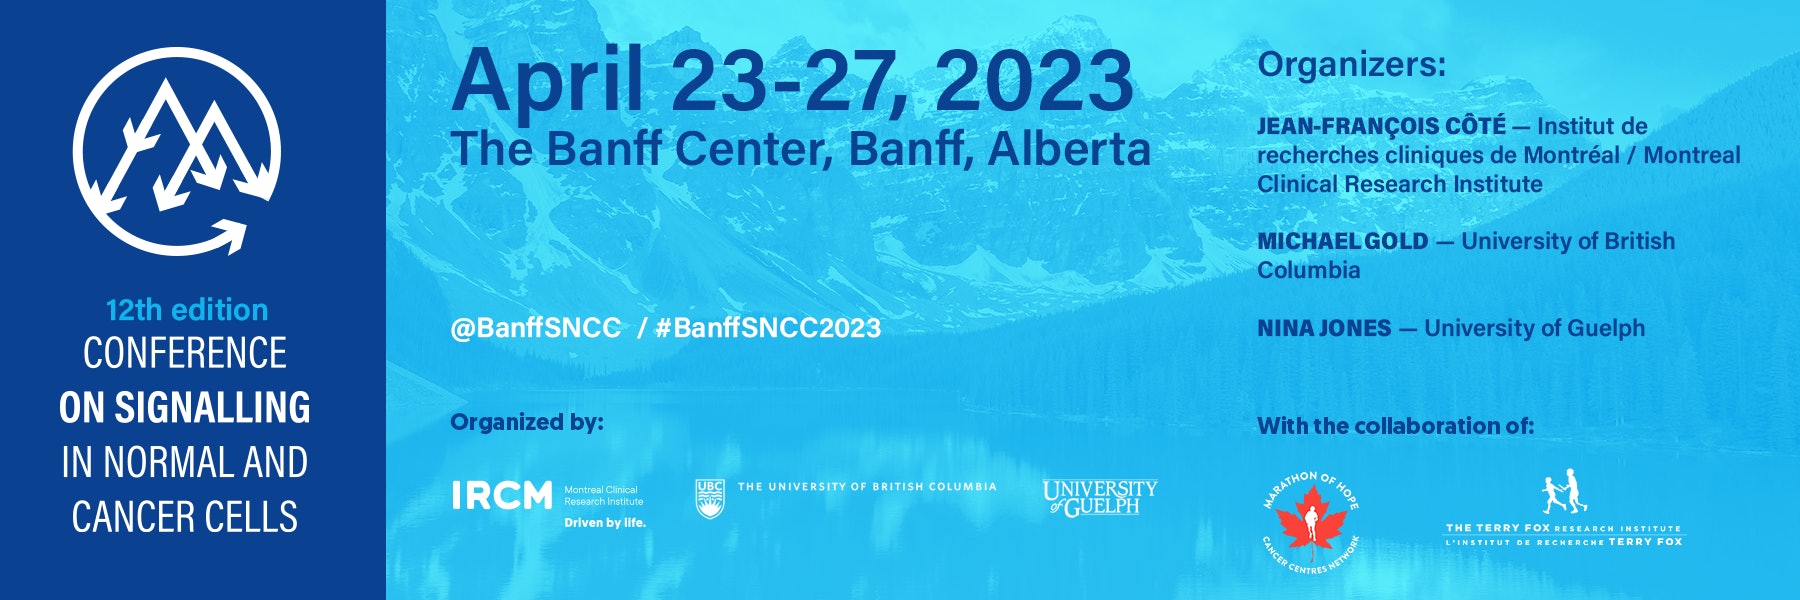 12th Signalling in Normal and Cancer Cells Conference Banff